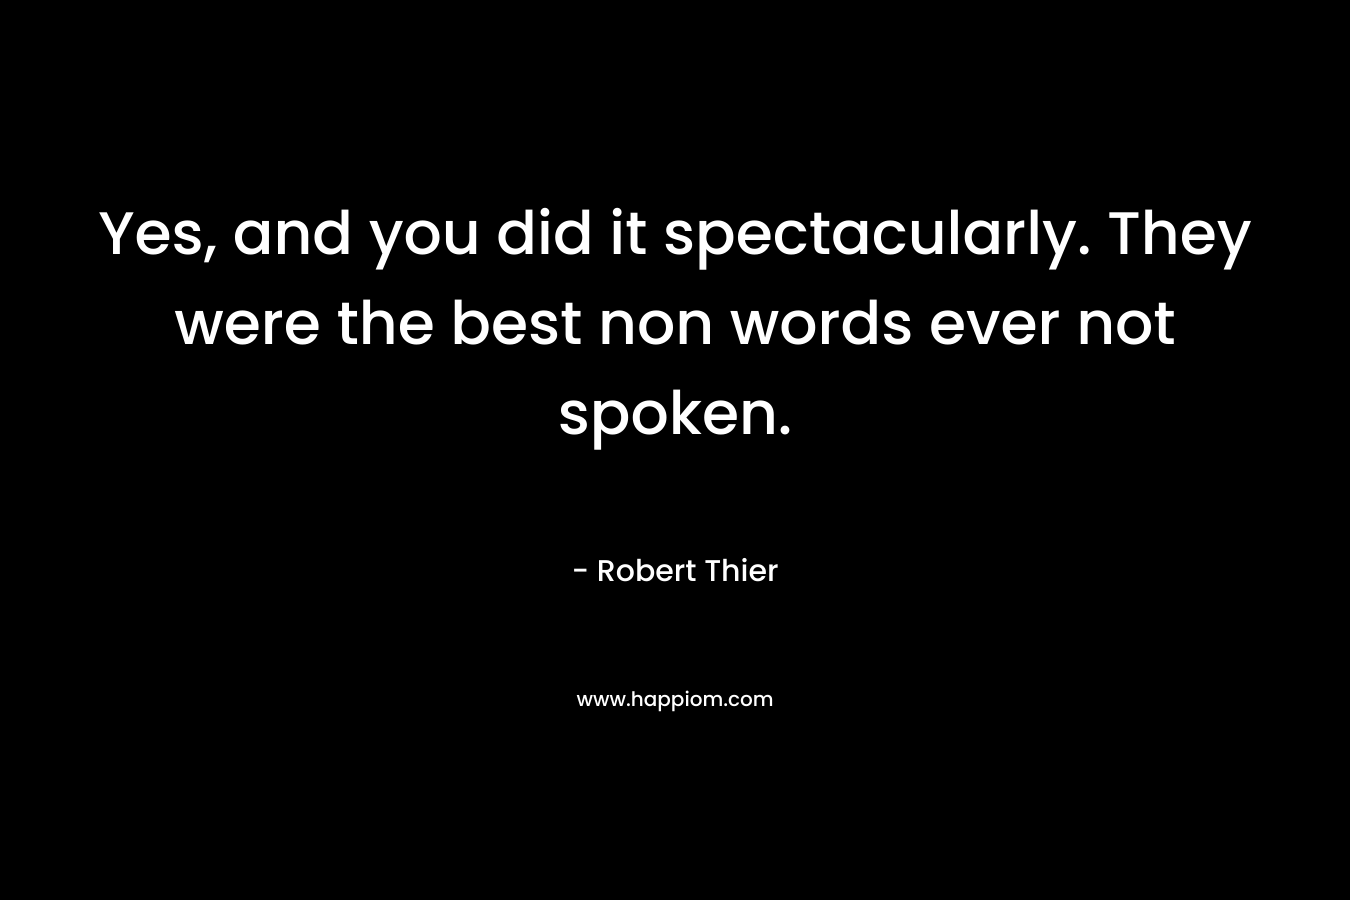 Yes, and you did it spectacularly. They were the best non words ever not spoken. – Robert Thier